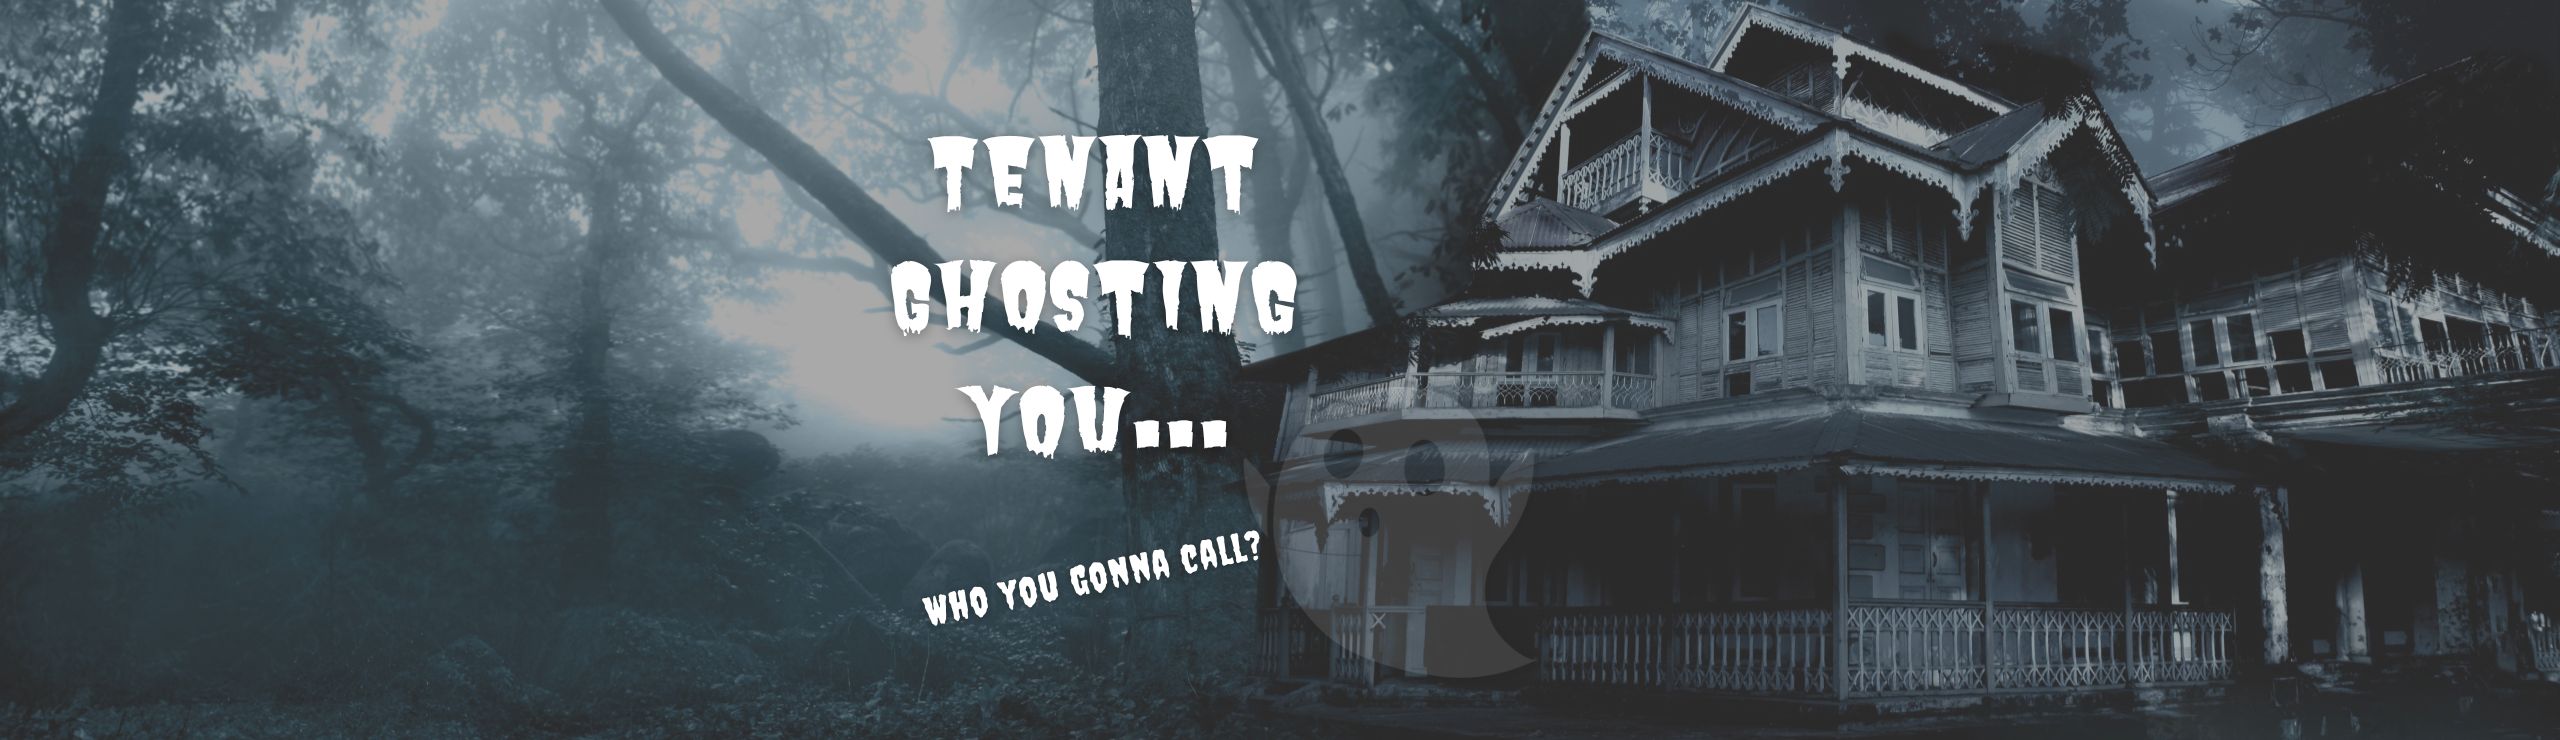 Tenant Ghosting You? Use THIS to Get Their Attention…